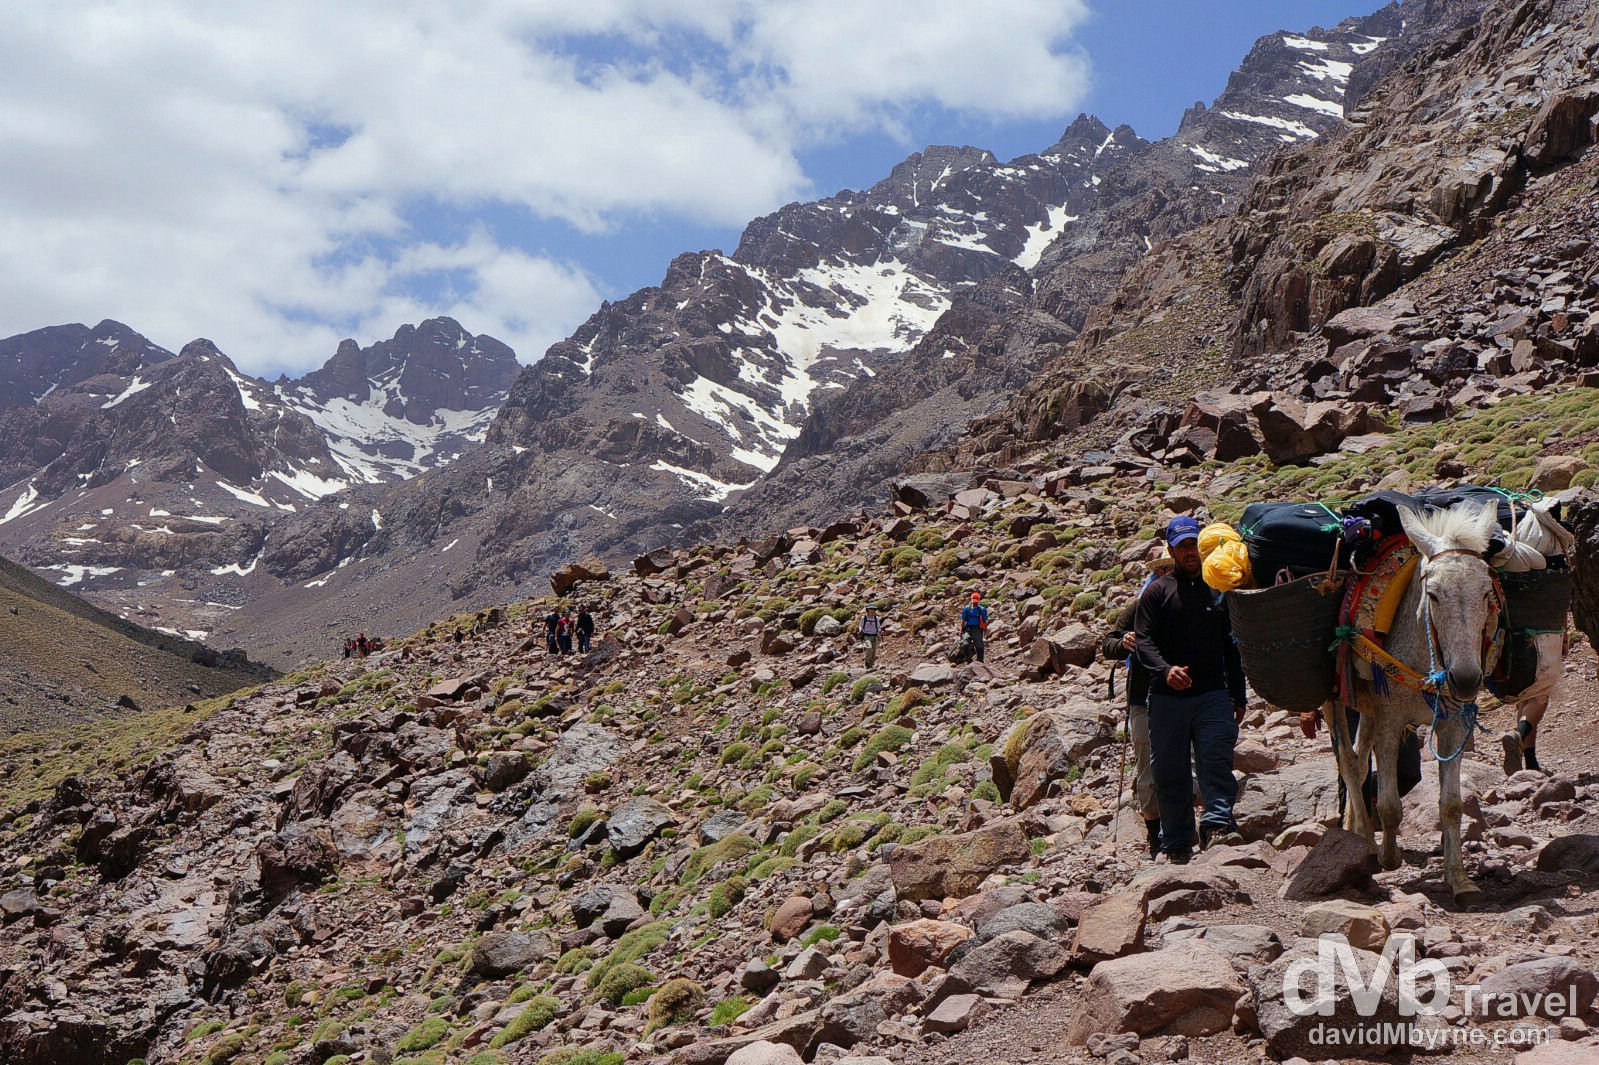 On the Jebel Toubkal trek in the High Atlas Mountains in central Morocco. May 10th, 2014.